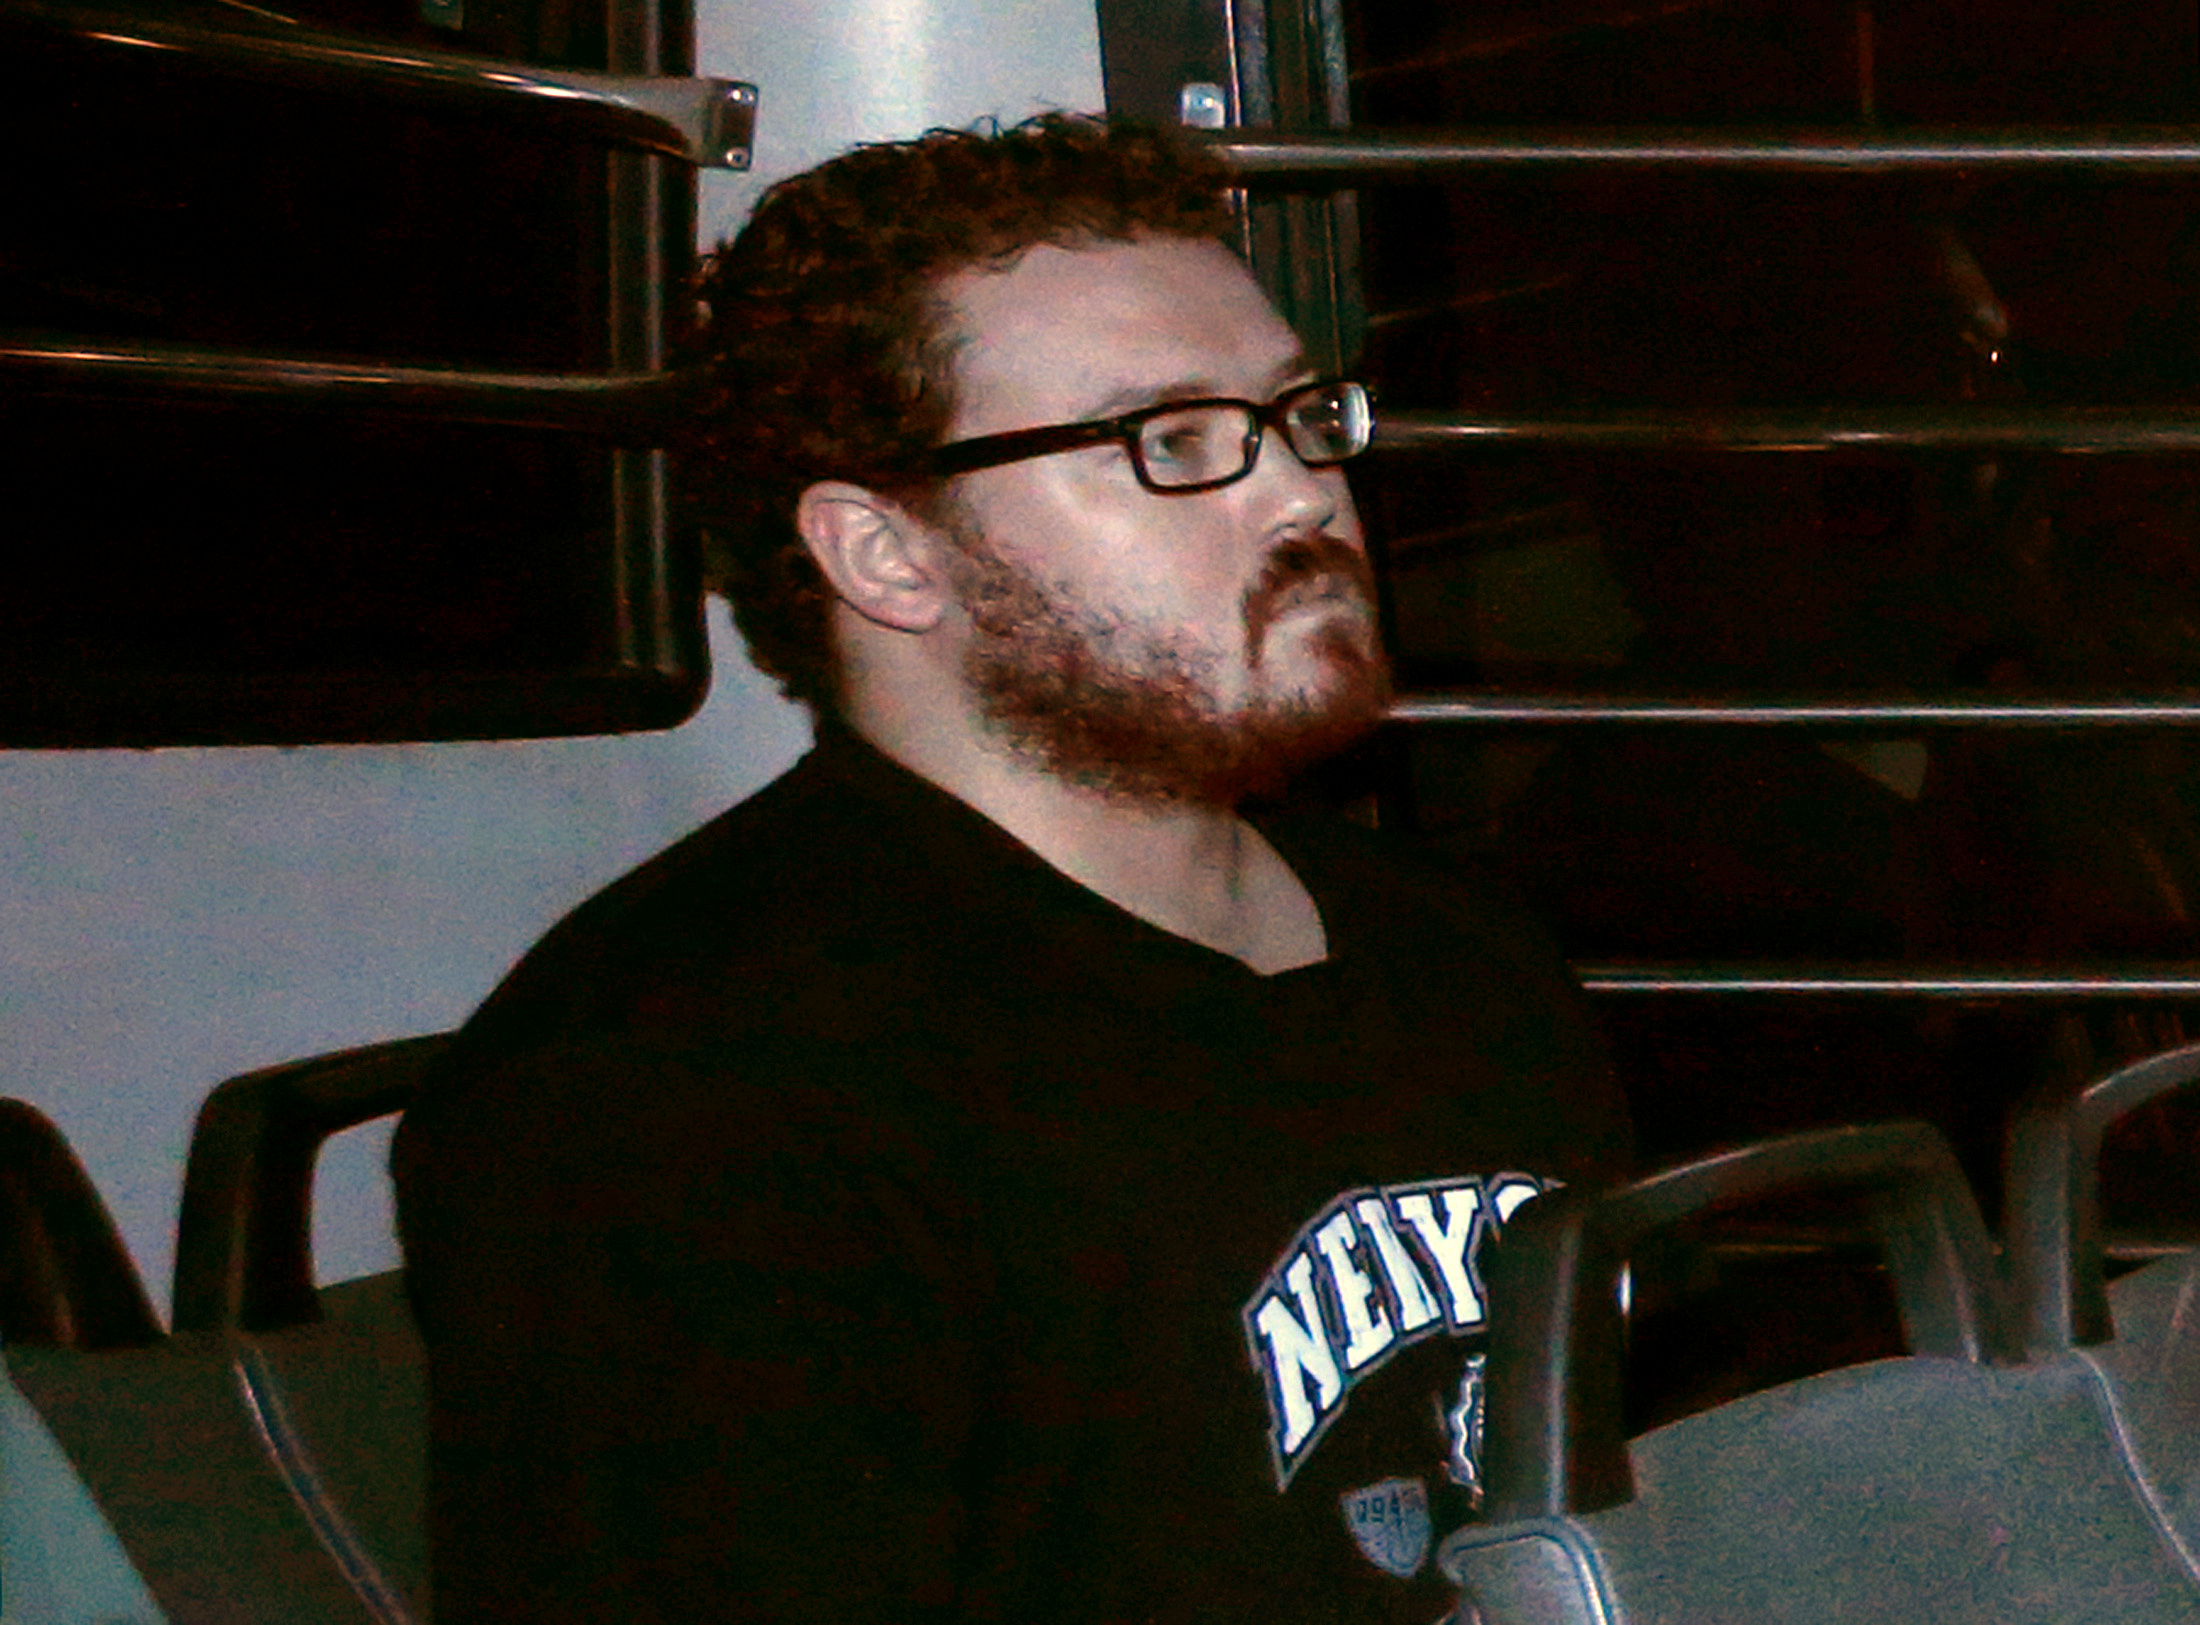 File photo of Jutting, a British banker charged with two counts of murder, sitting in the back row of a prison bus as he arrives at the Eastern Law Courts in Hong Kong